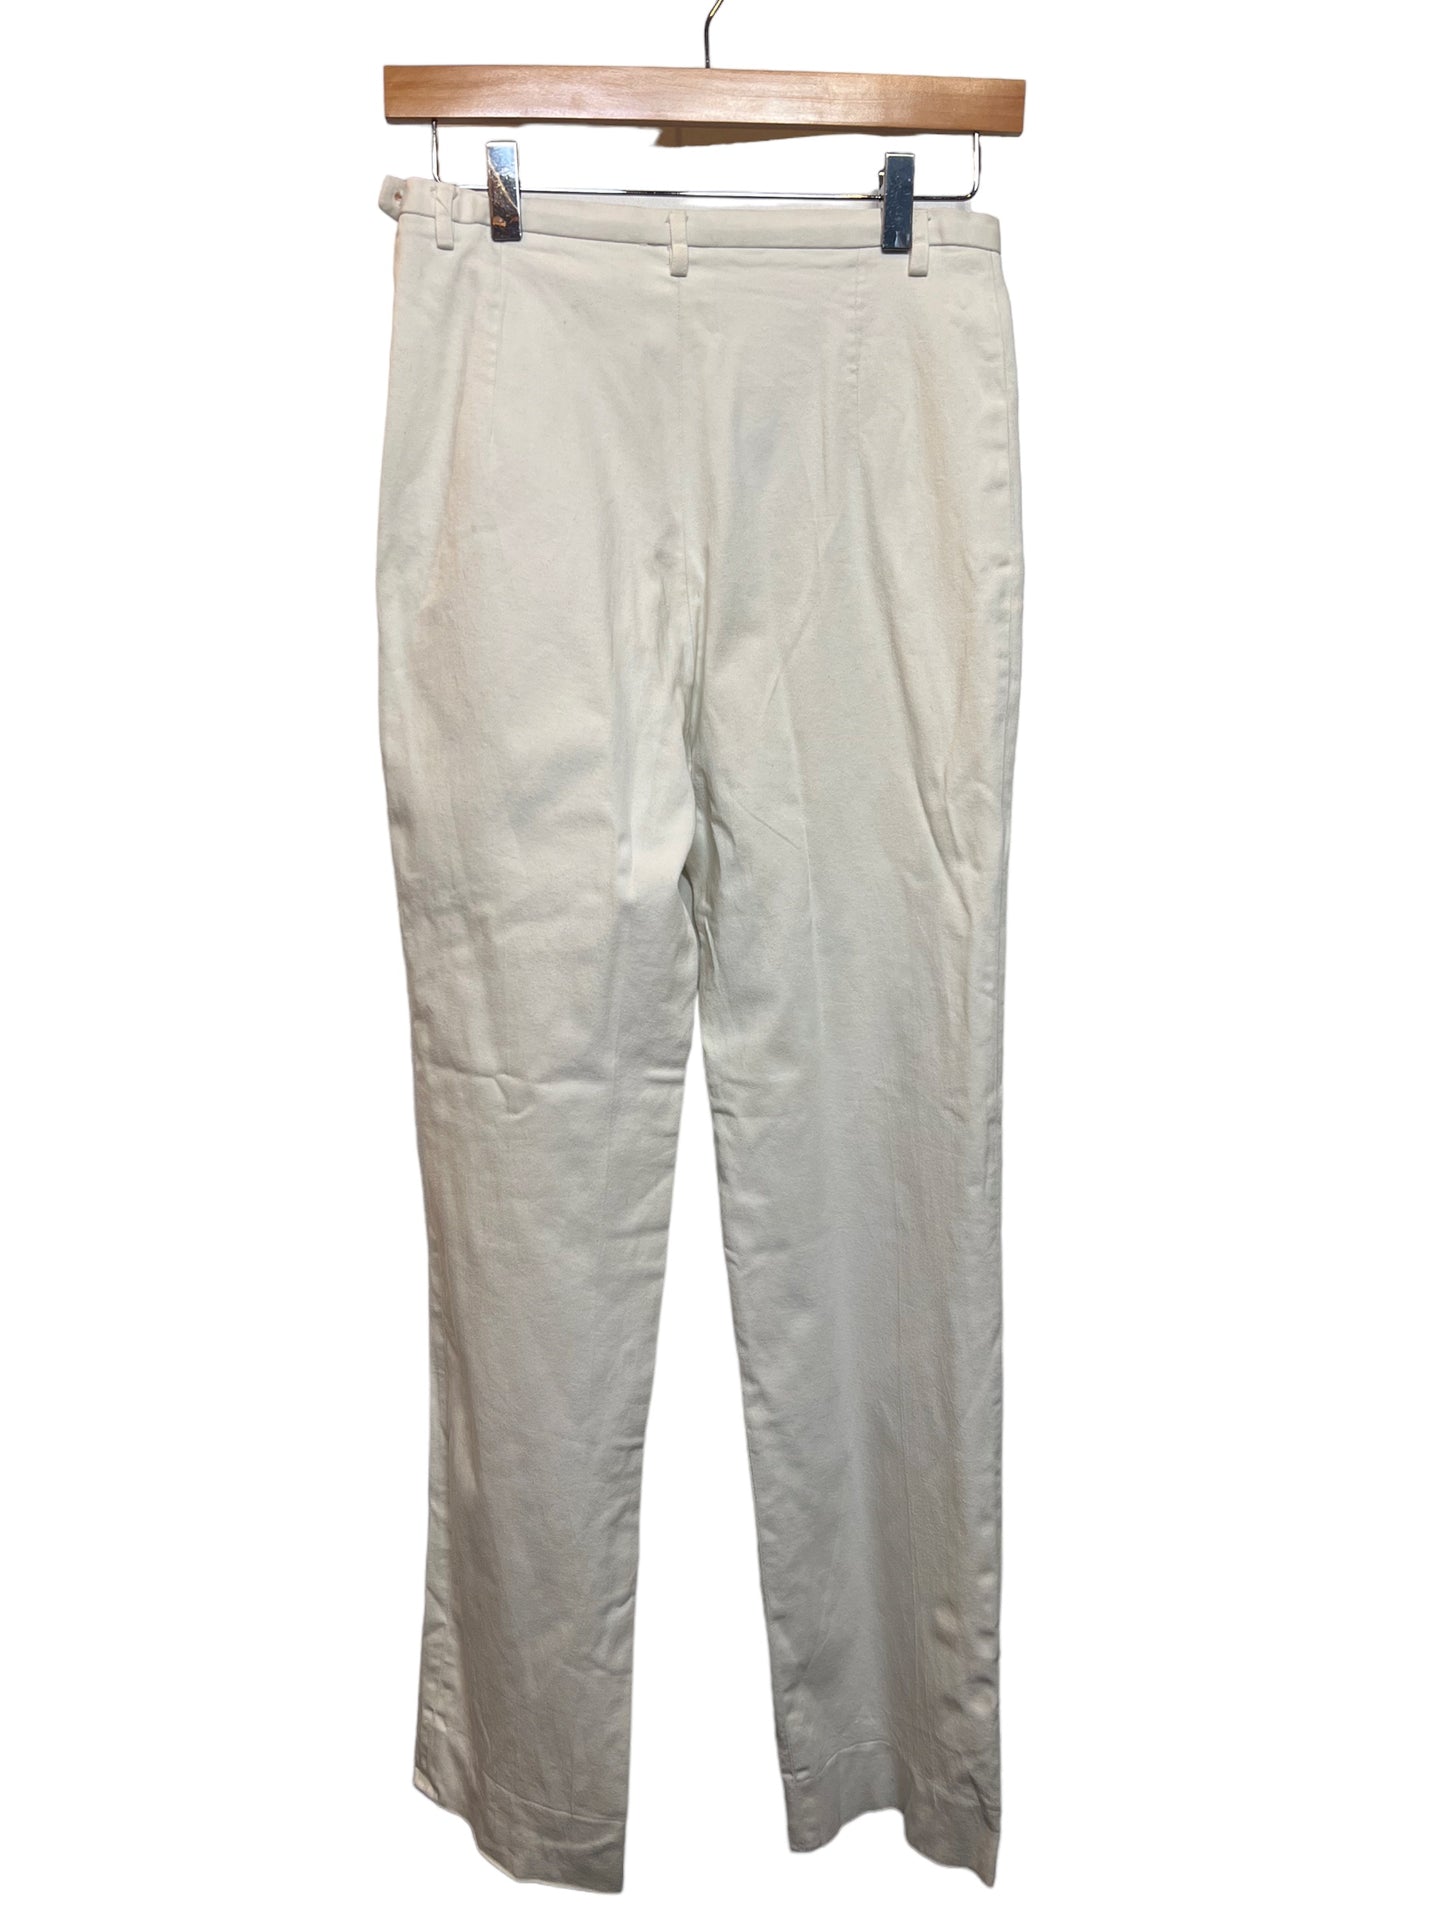 Vintage Burberry White Womens Trousers (Size 28x32)